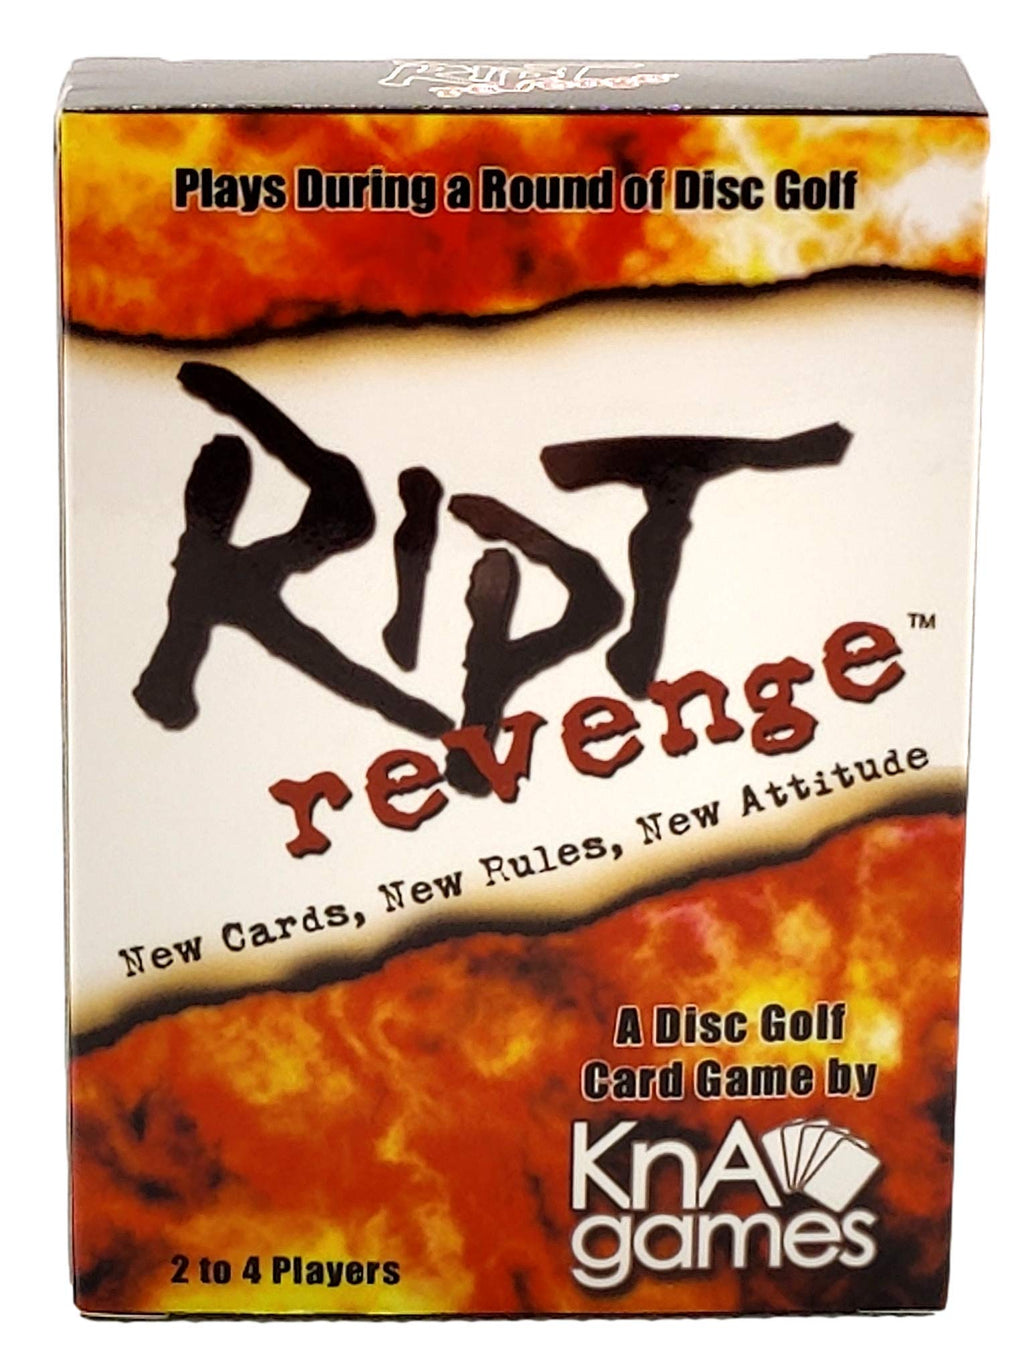 Ript Revenge Disc Golf Card Game | Fun Disc Golf Game | Plays During a Round of Disc Golf | Play for Skins or for Strokes | 2-4 Players | Pack of 52 Cards - BeesActive Australia